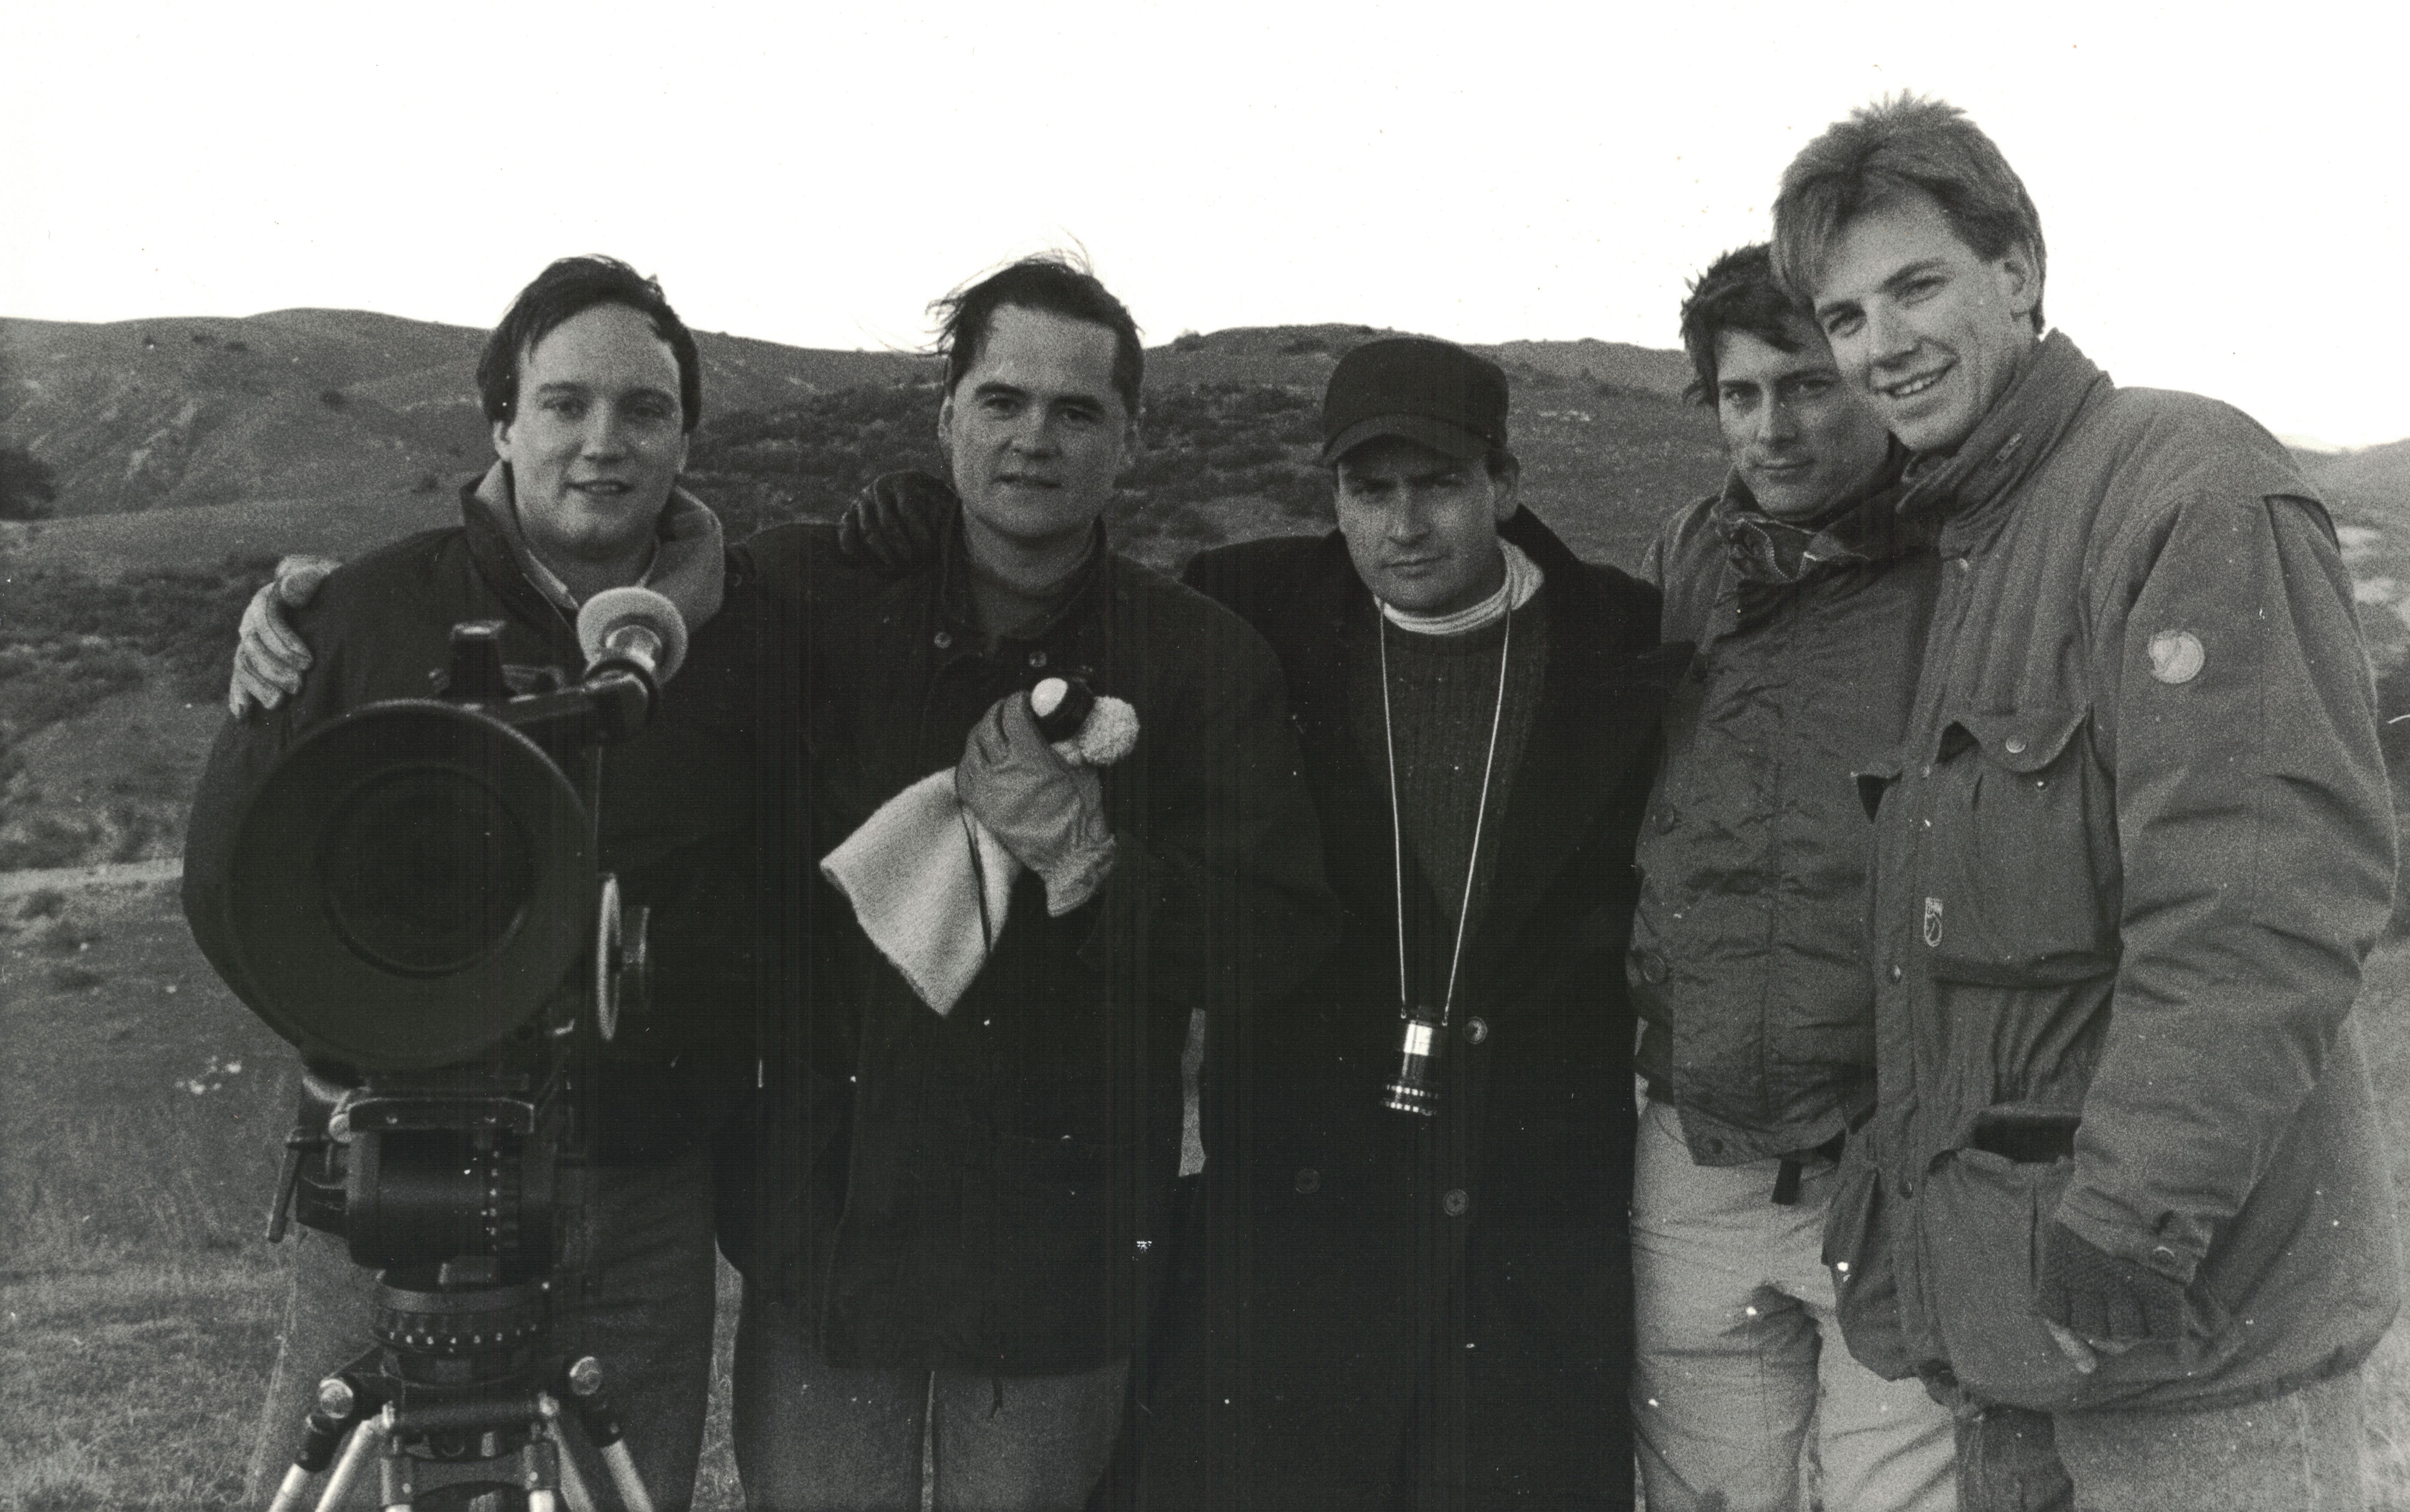 AFI cinematography fellows with director Charlie Sheen. From left Chris Taylor, Alan Wright, Keith Barefoot.